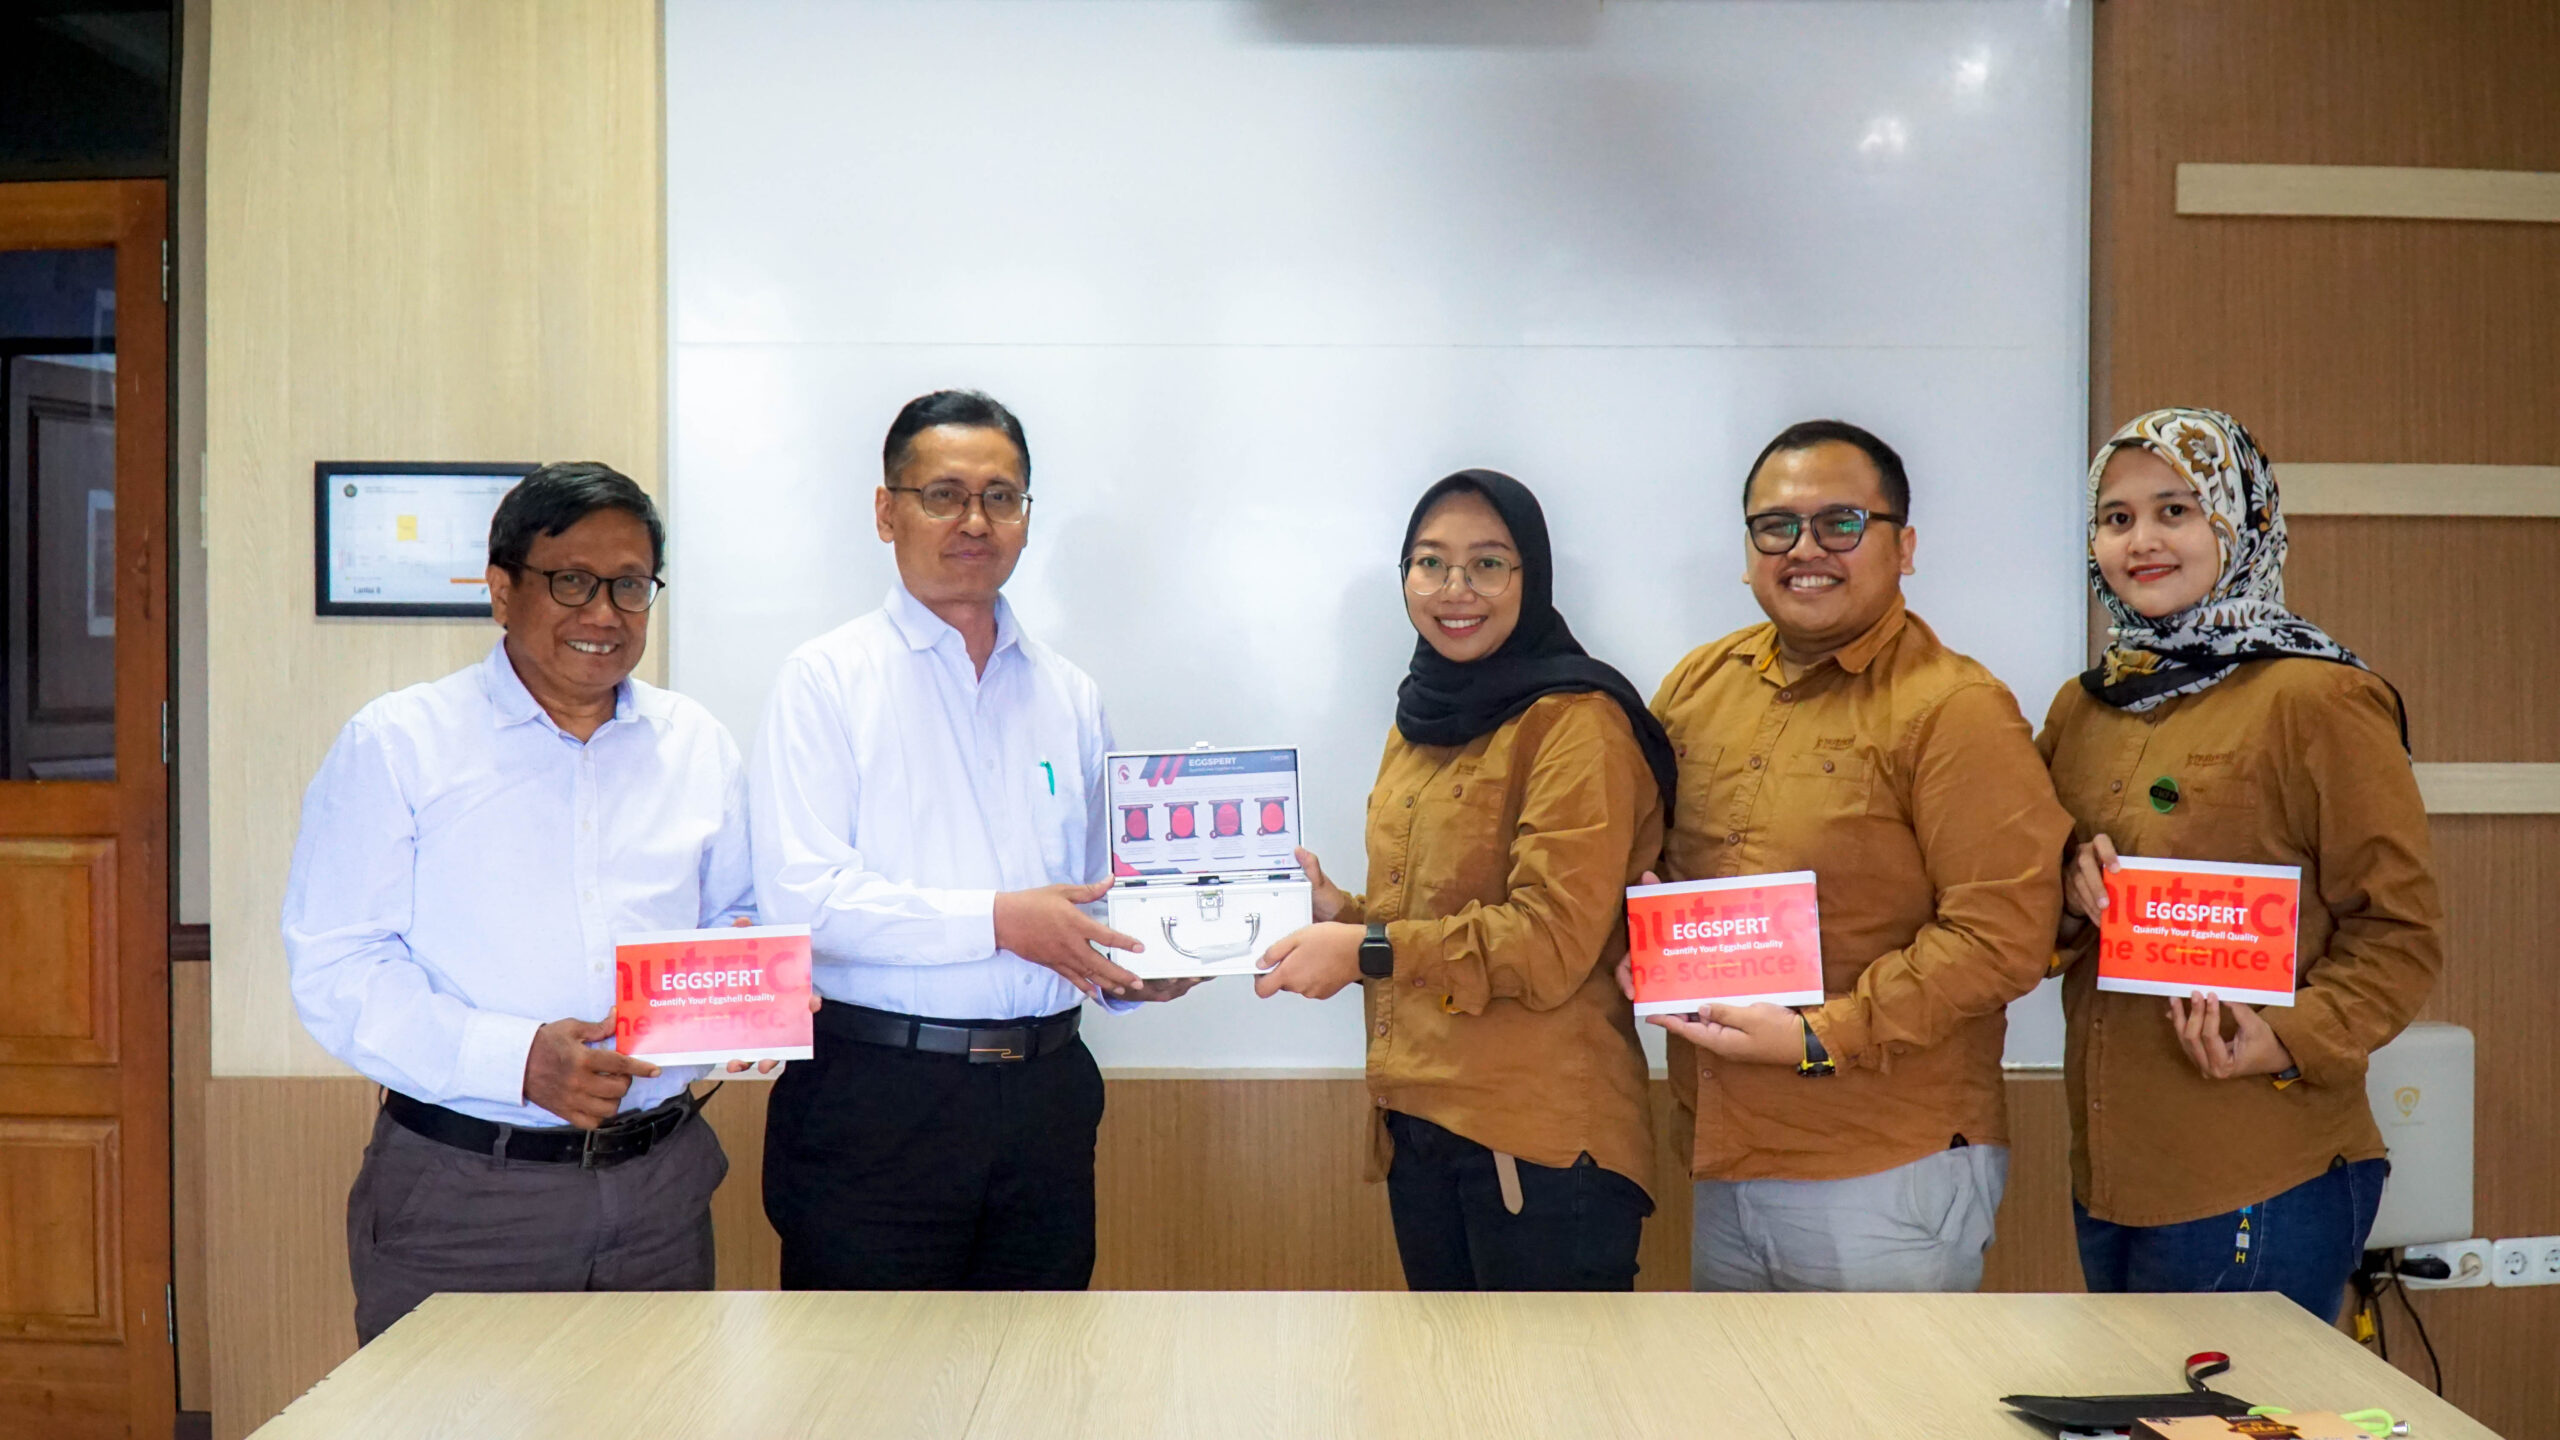 Grant of Innovative Laboratory Equipment “Eggspert Tool” by PT Nutricell Pacific to Faculty of Animal Science, University of Brawijaya